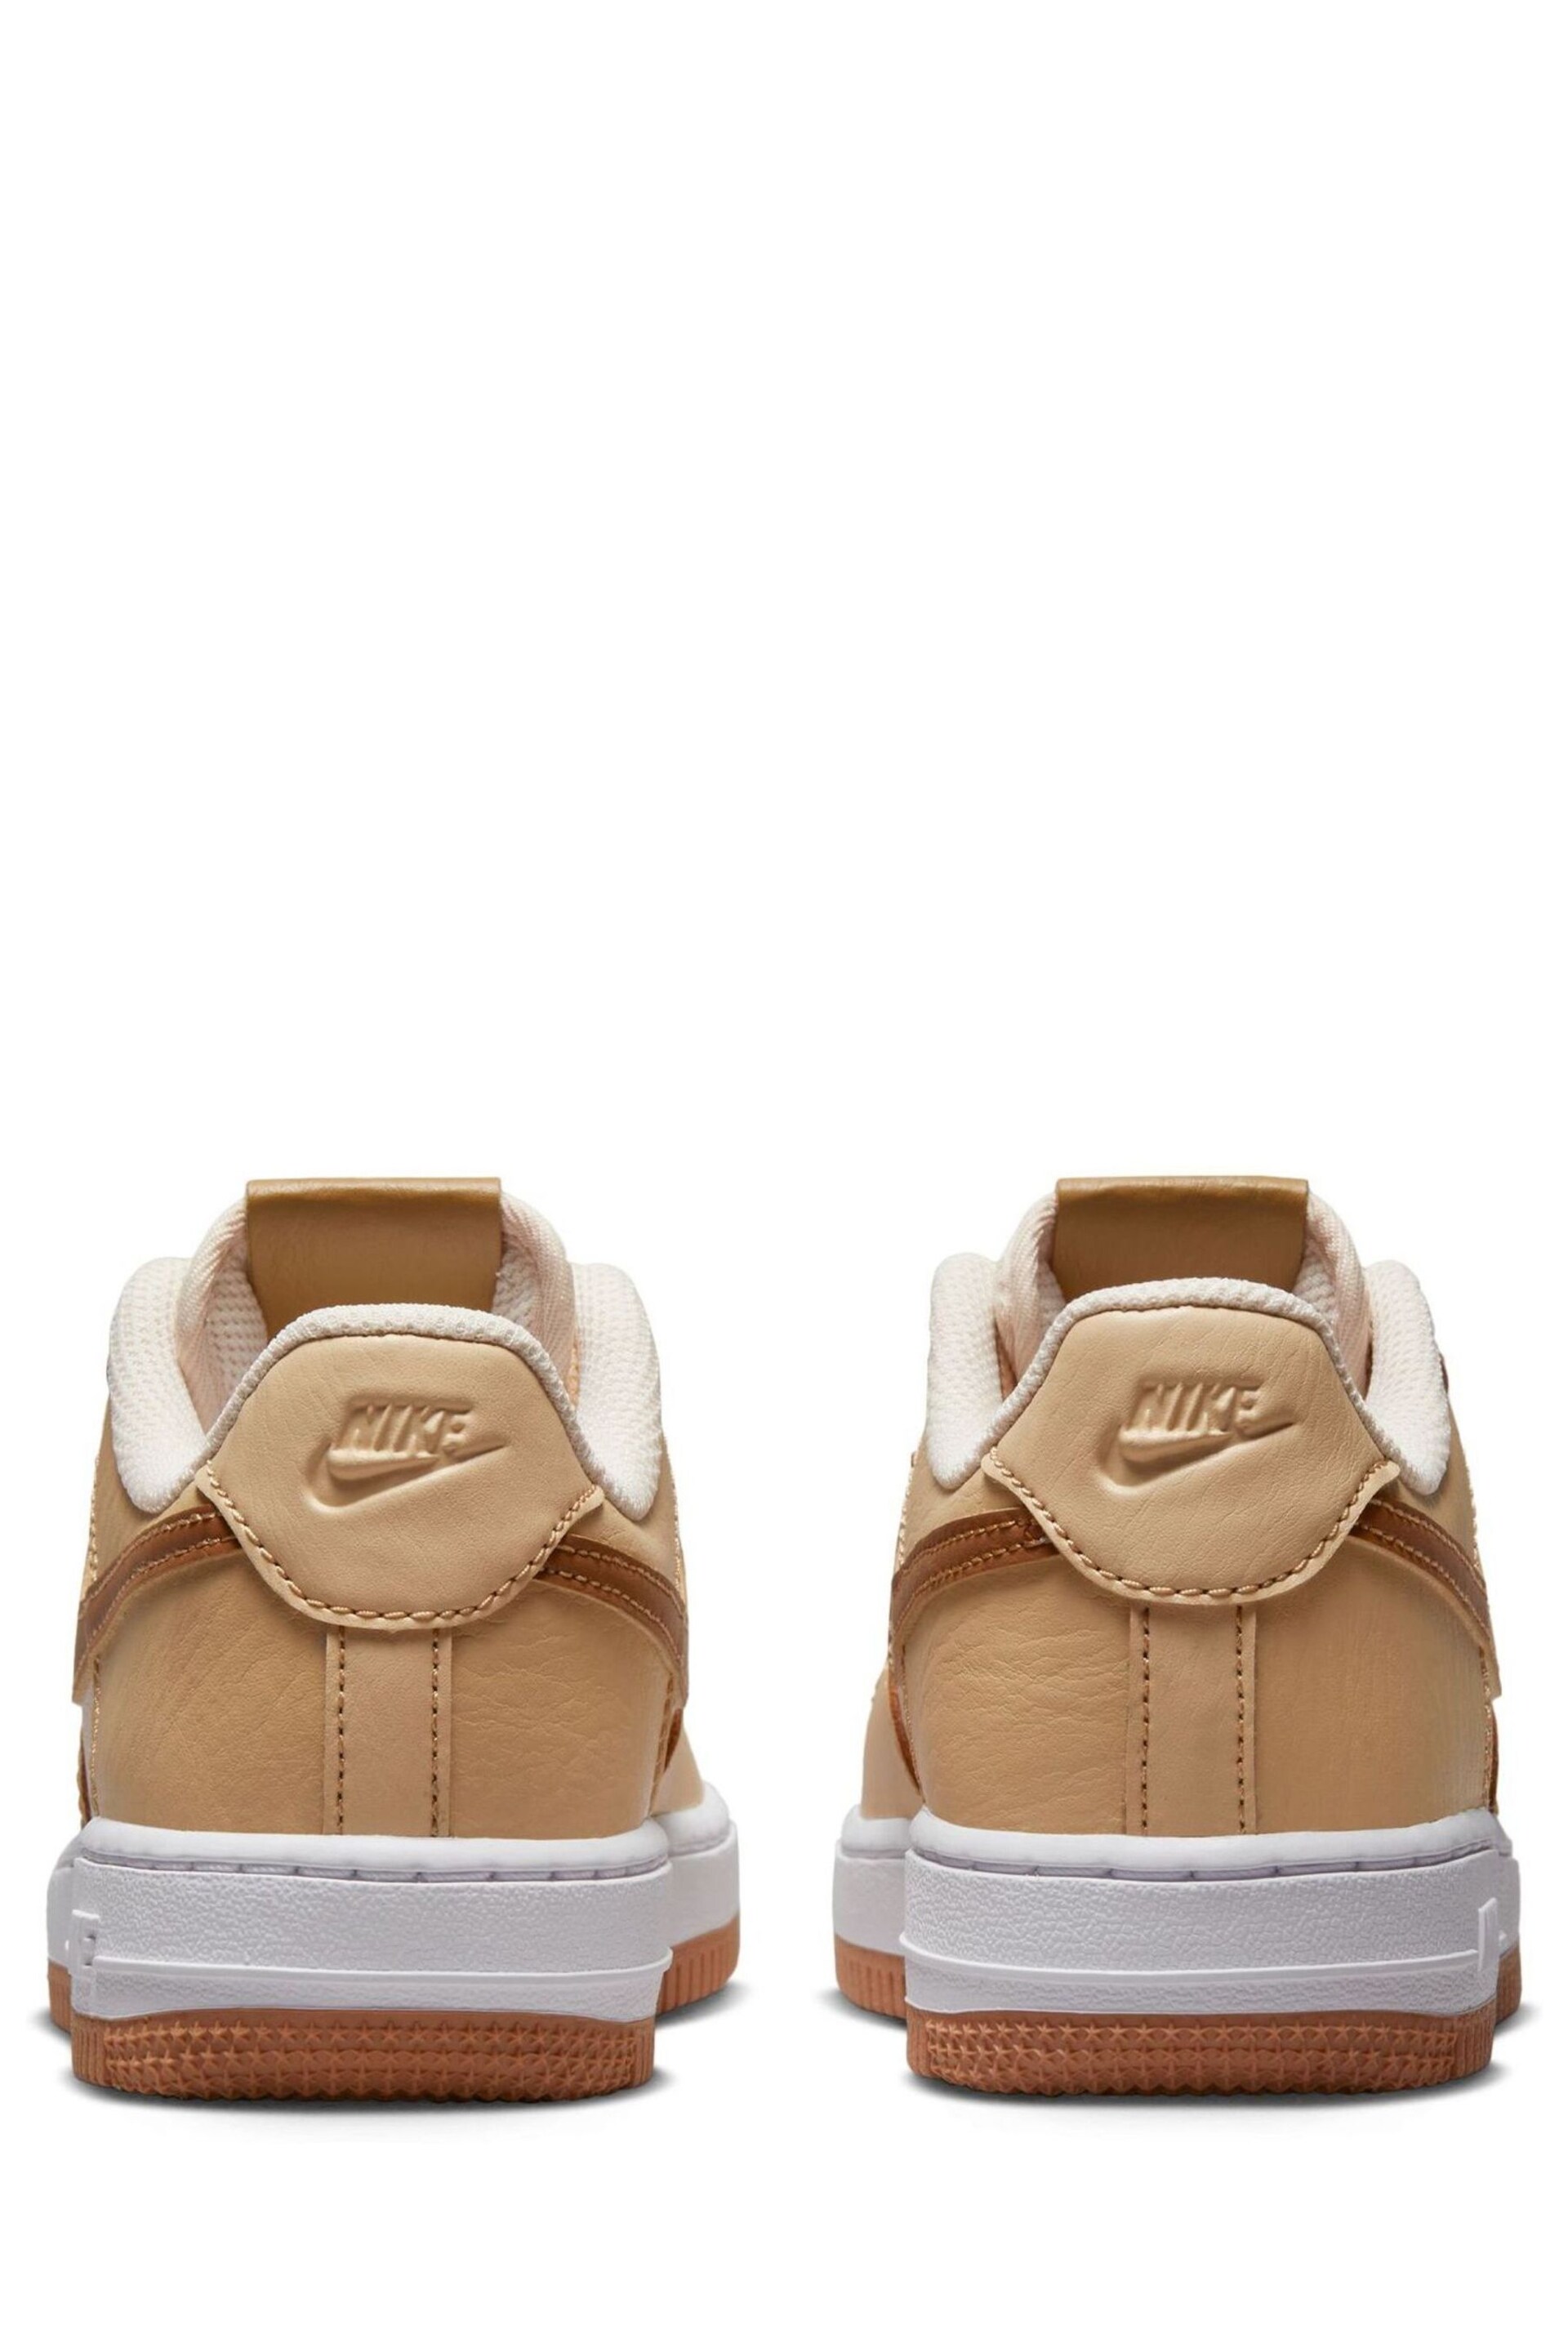 Nike Neutral Force 1 LV8 1 Junior Trainers - Image 5 of 6